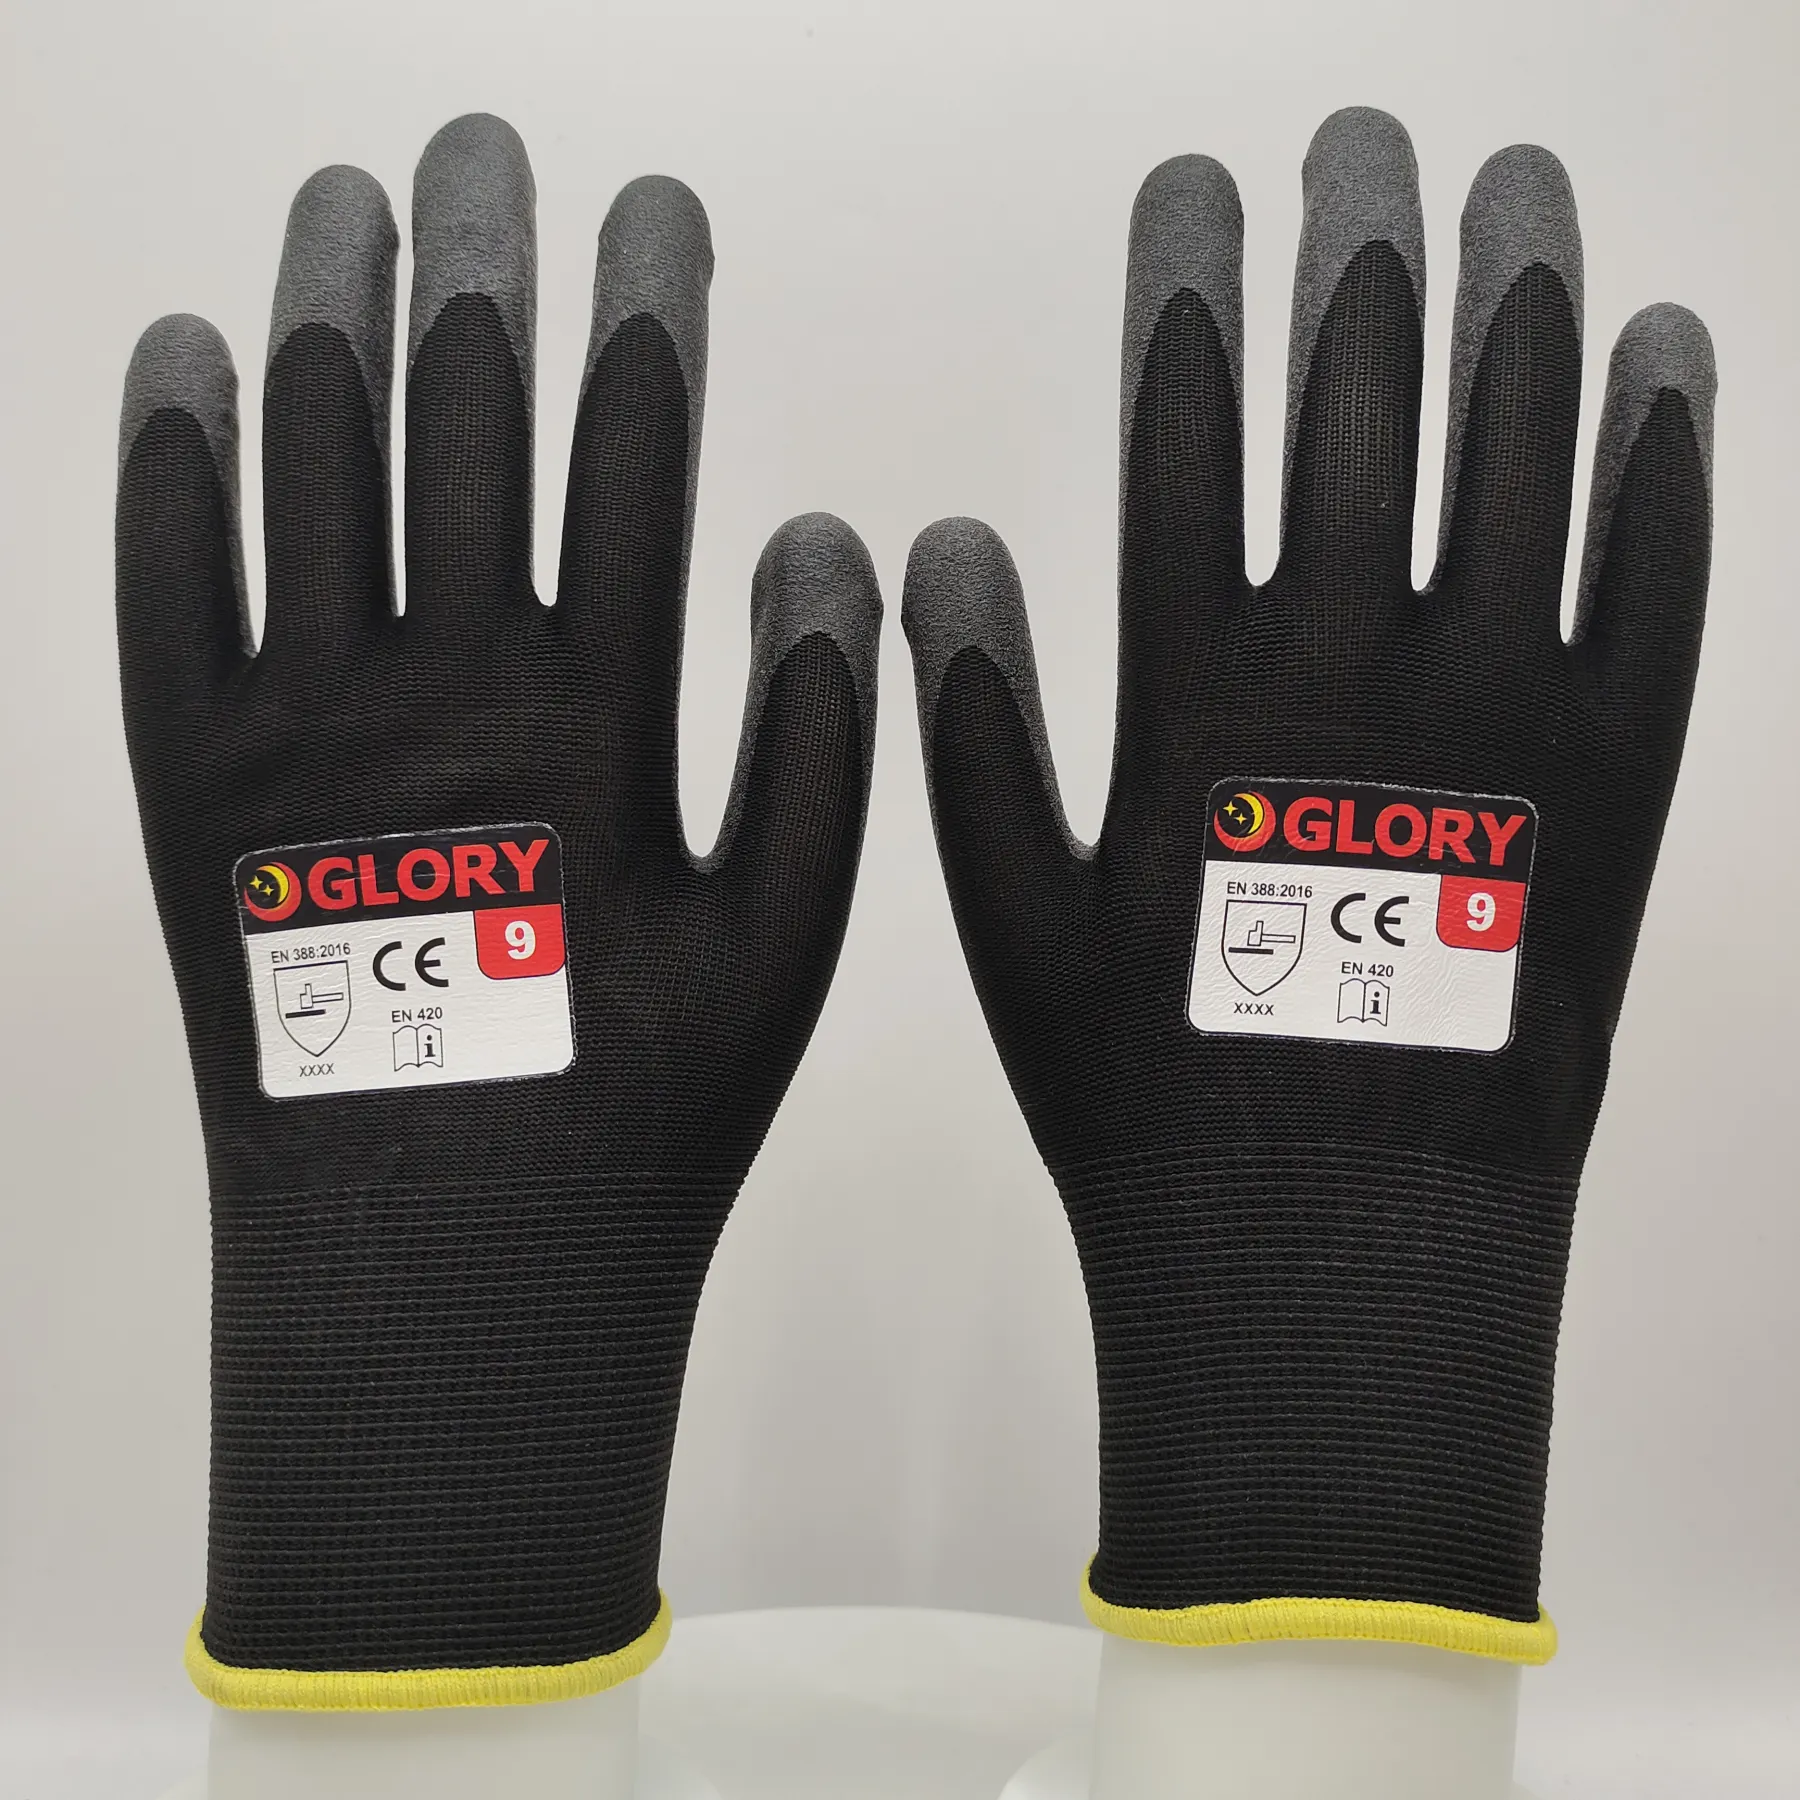 13 gauge sandy nitrile coated working gloves breathable and comfortable hand protection gloves